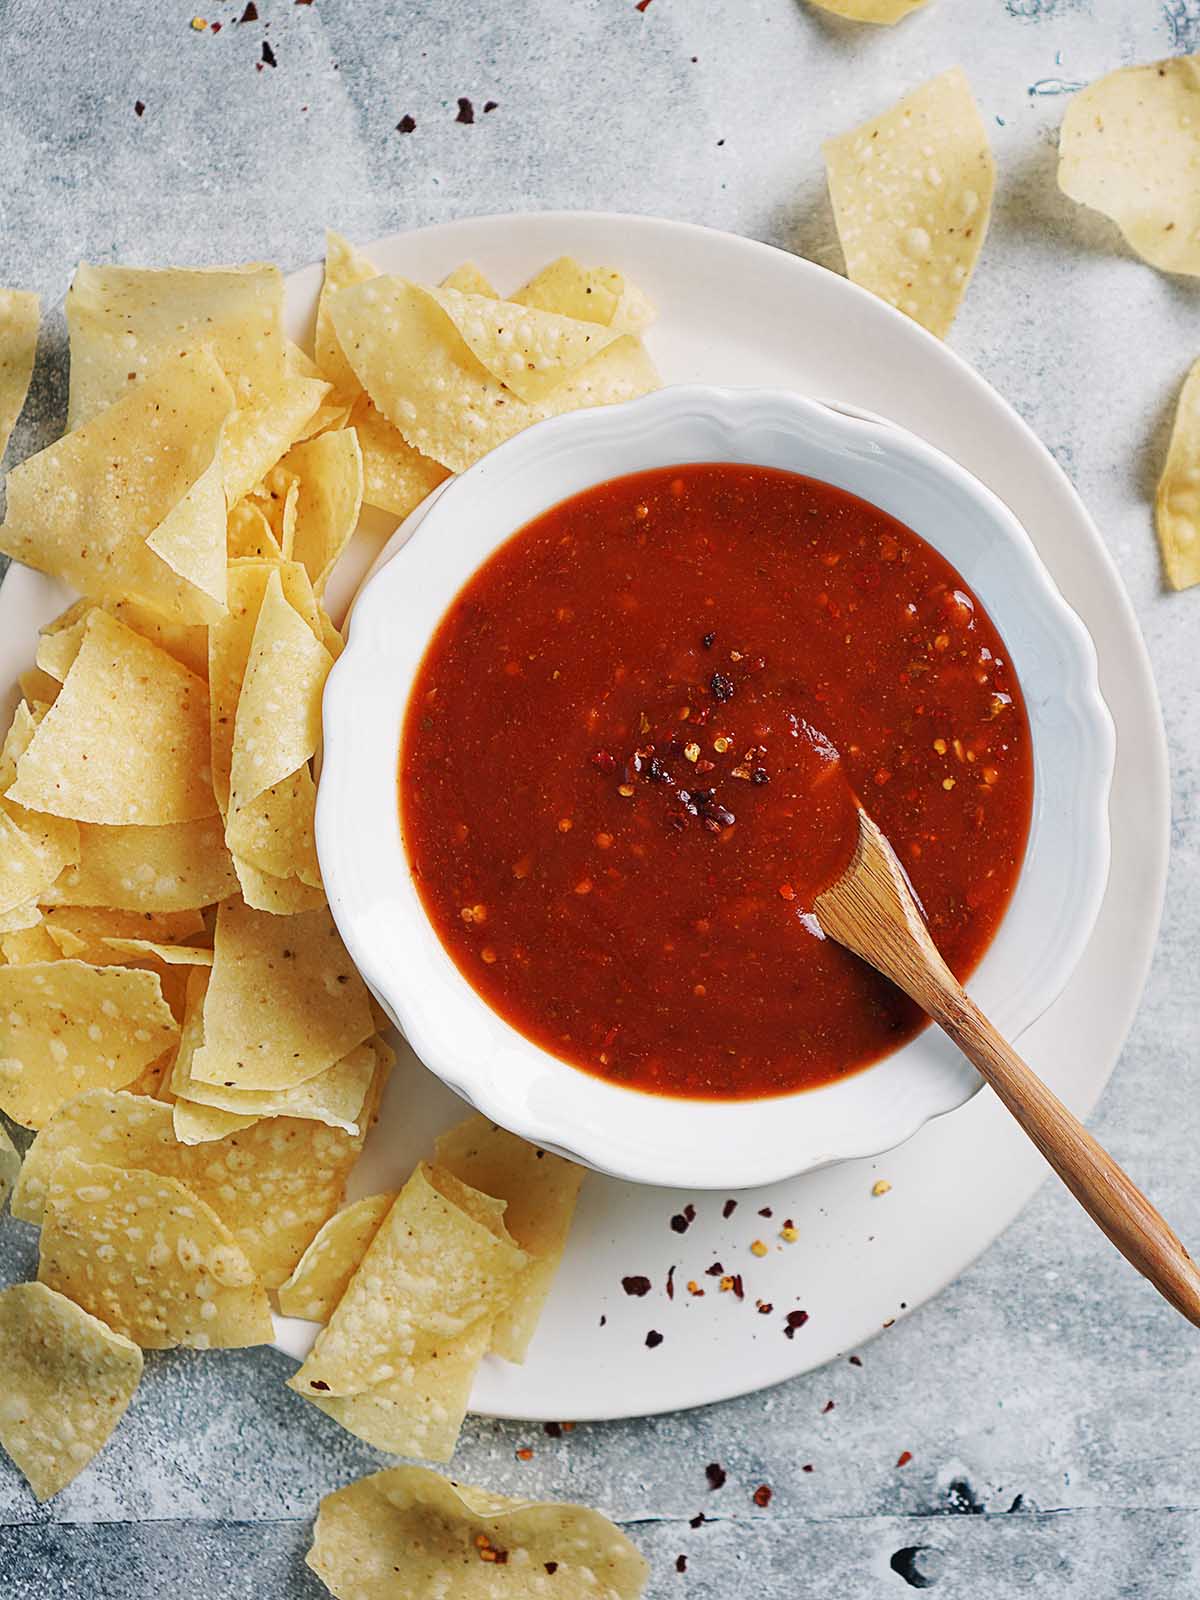 A bowl with red sauce and tortilla chips on the side.